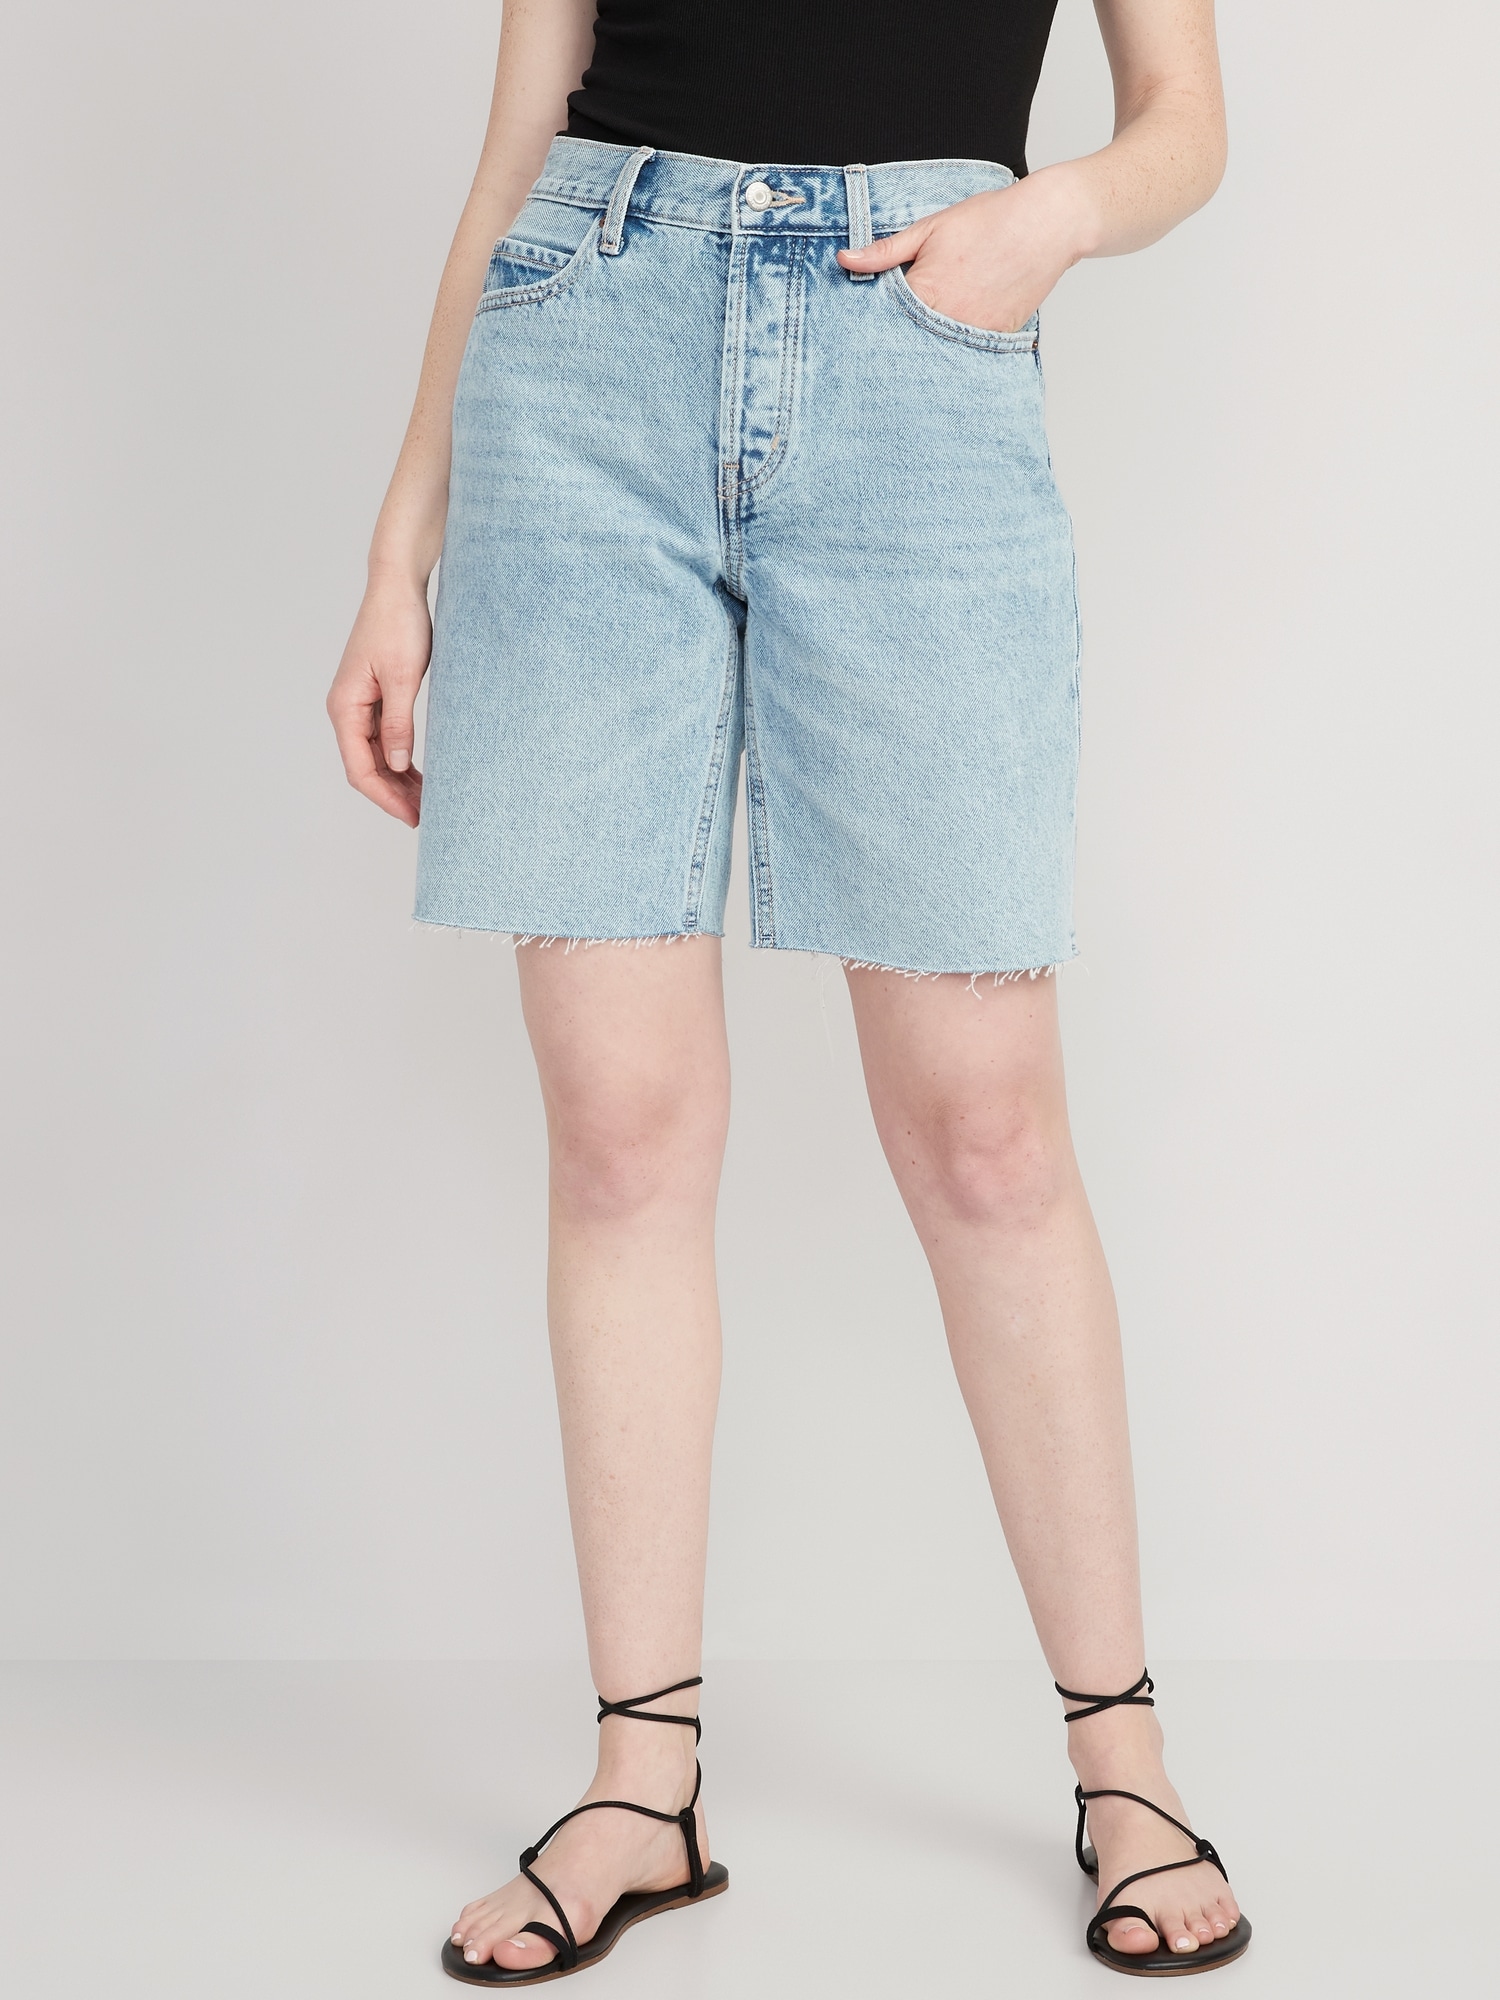 Old Navy High-Waisted Slouchy Button-Fly Cut-Off Jean Shorts for Women -- 9-inch inseam blue. 1